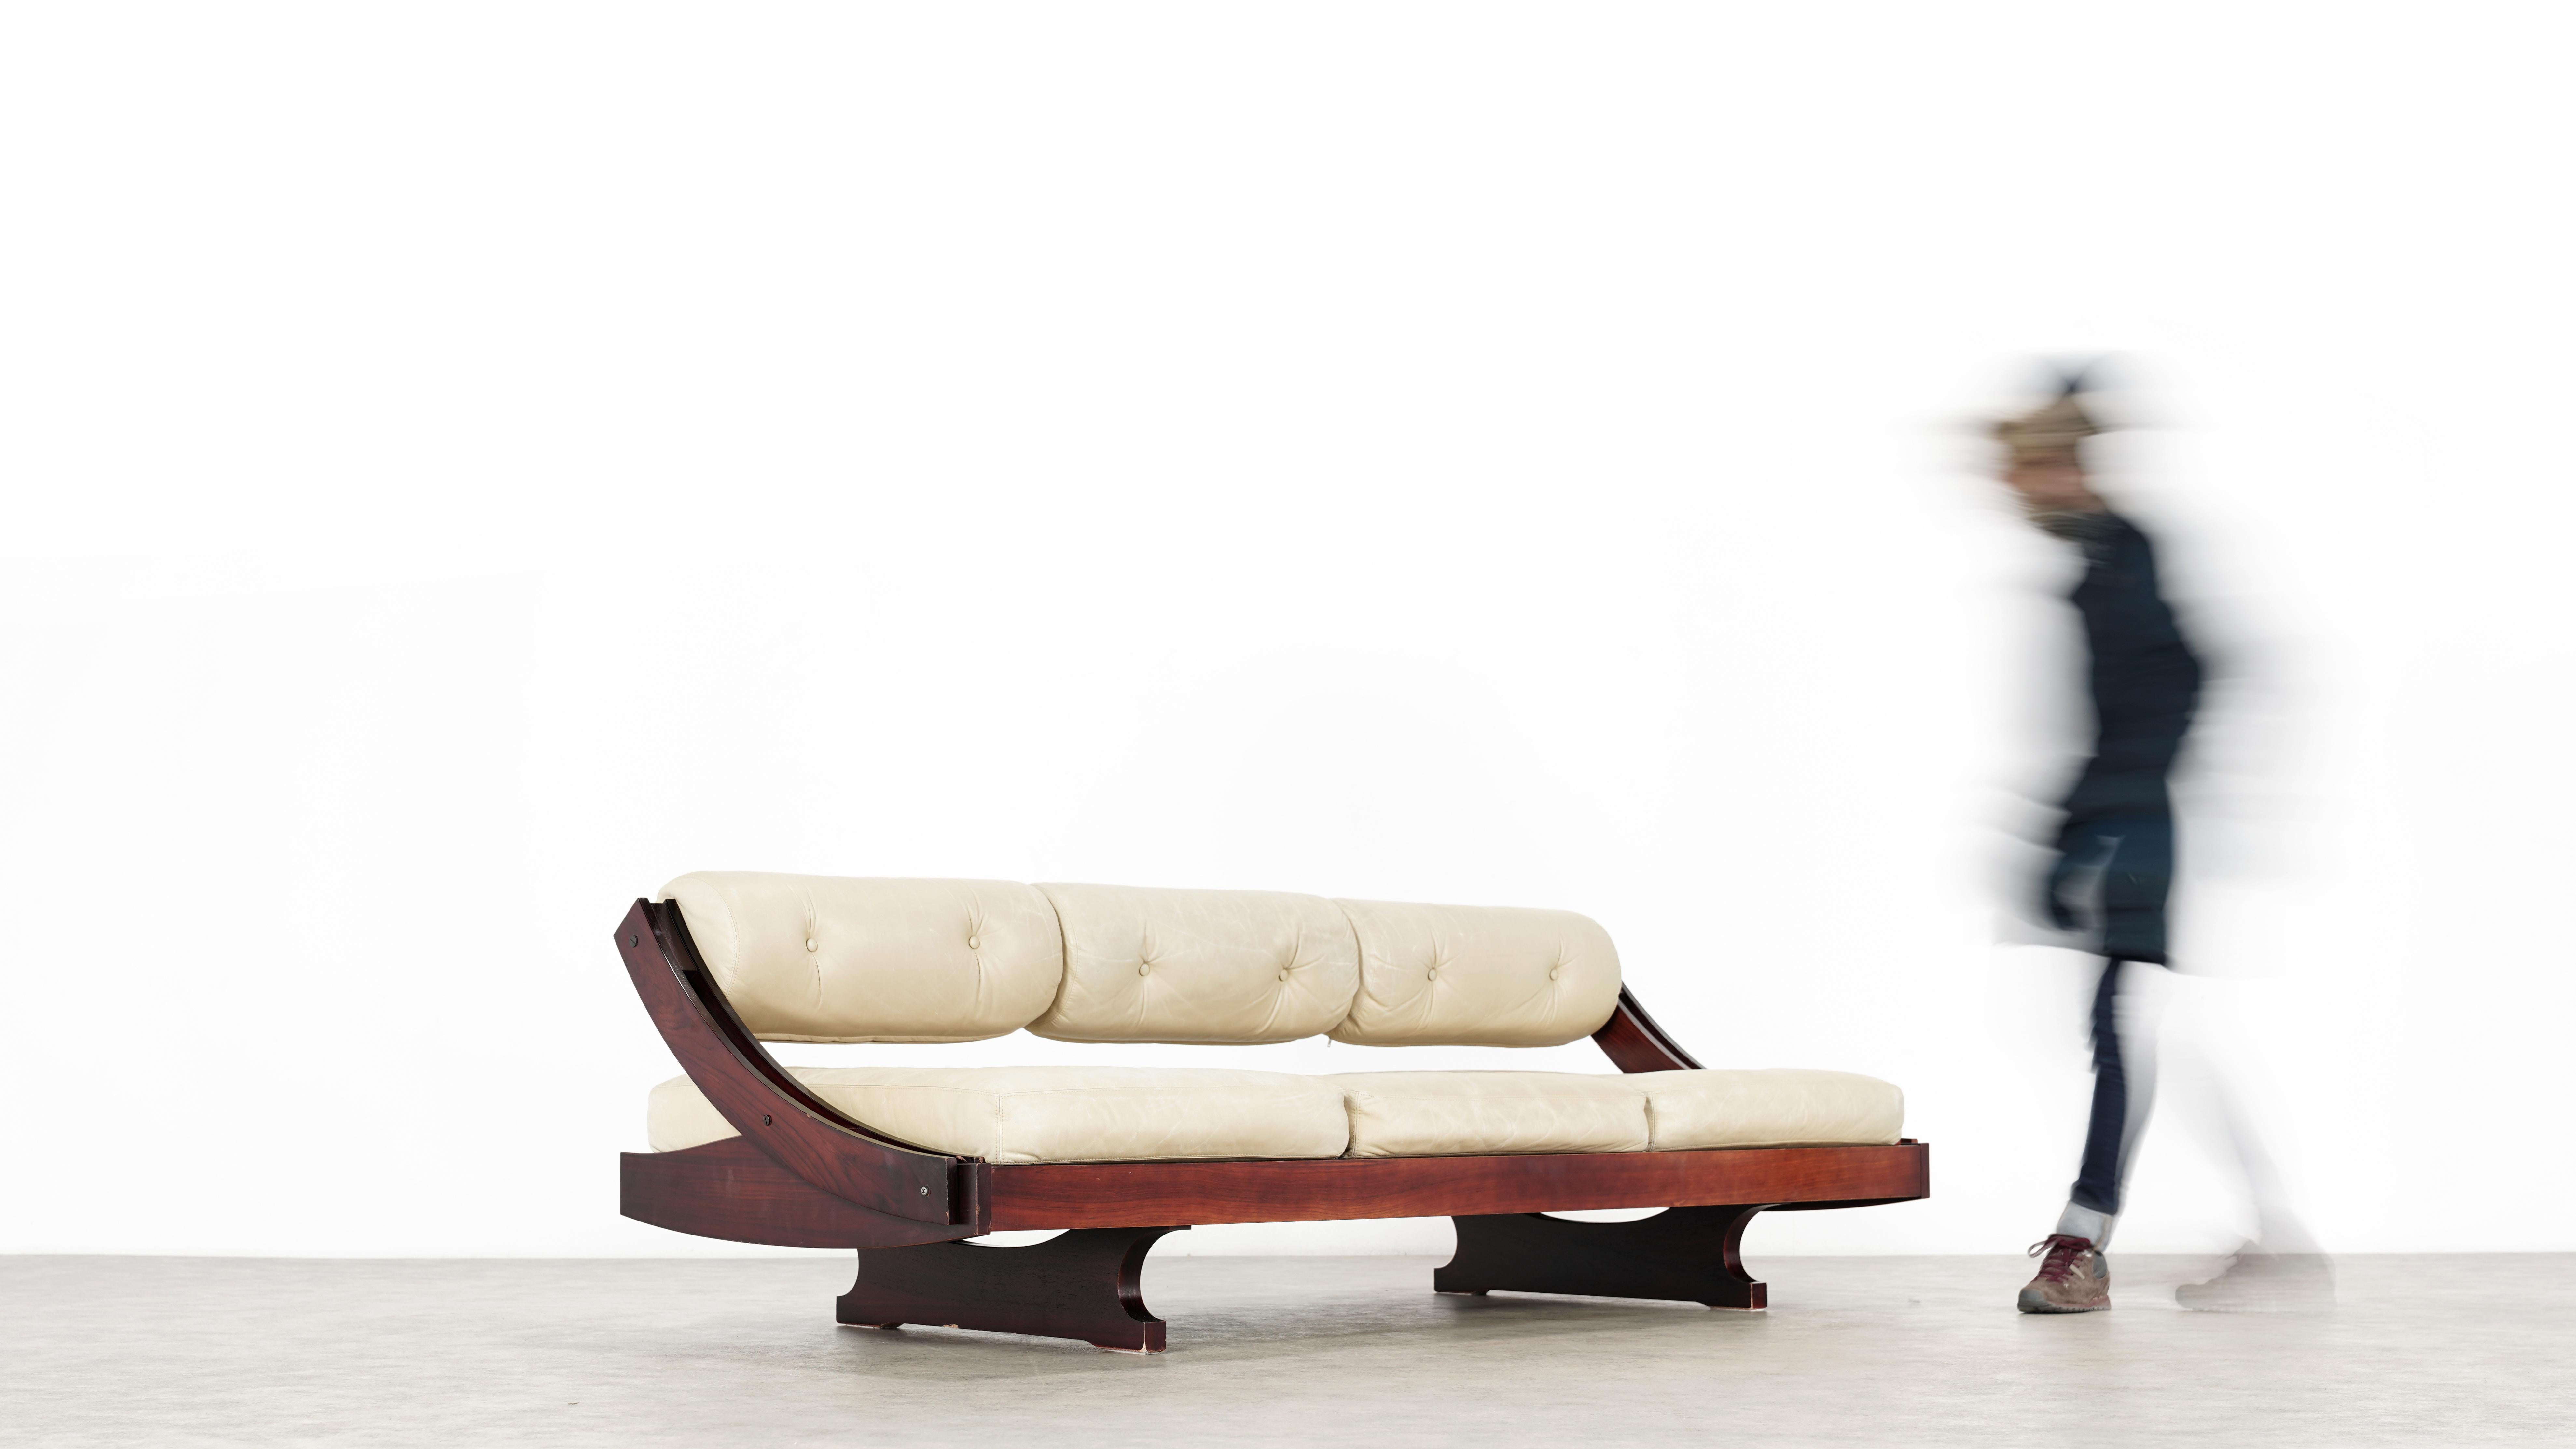 Mid-Century Modern Gianni Songia, Daybed GS 195 and Sofa, 1963 for Sormani, Handmade in Italy